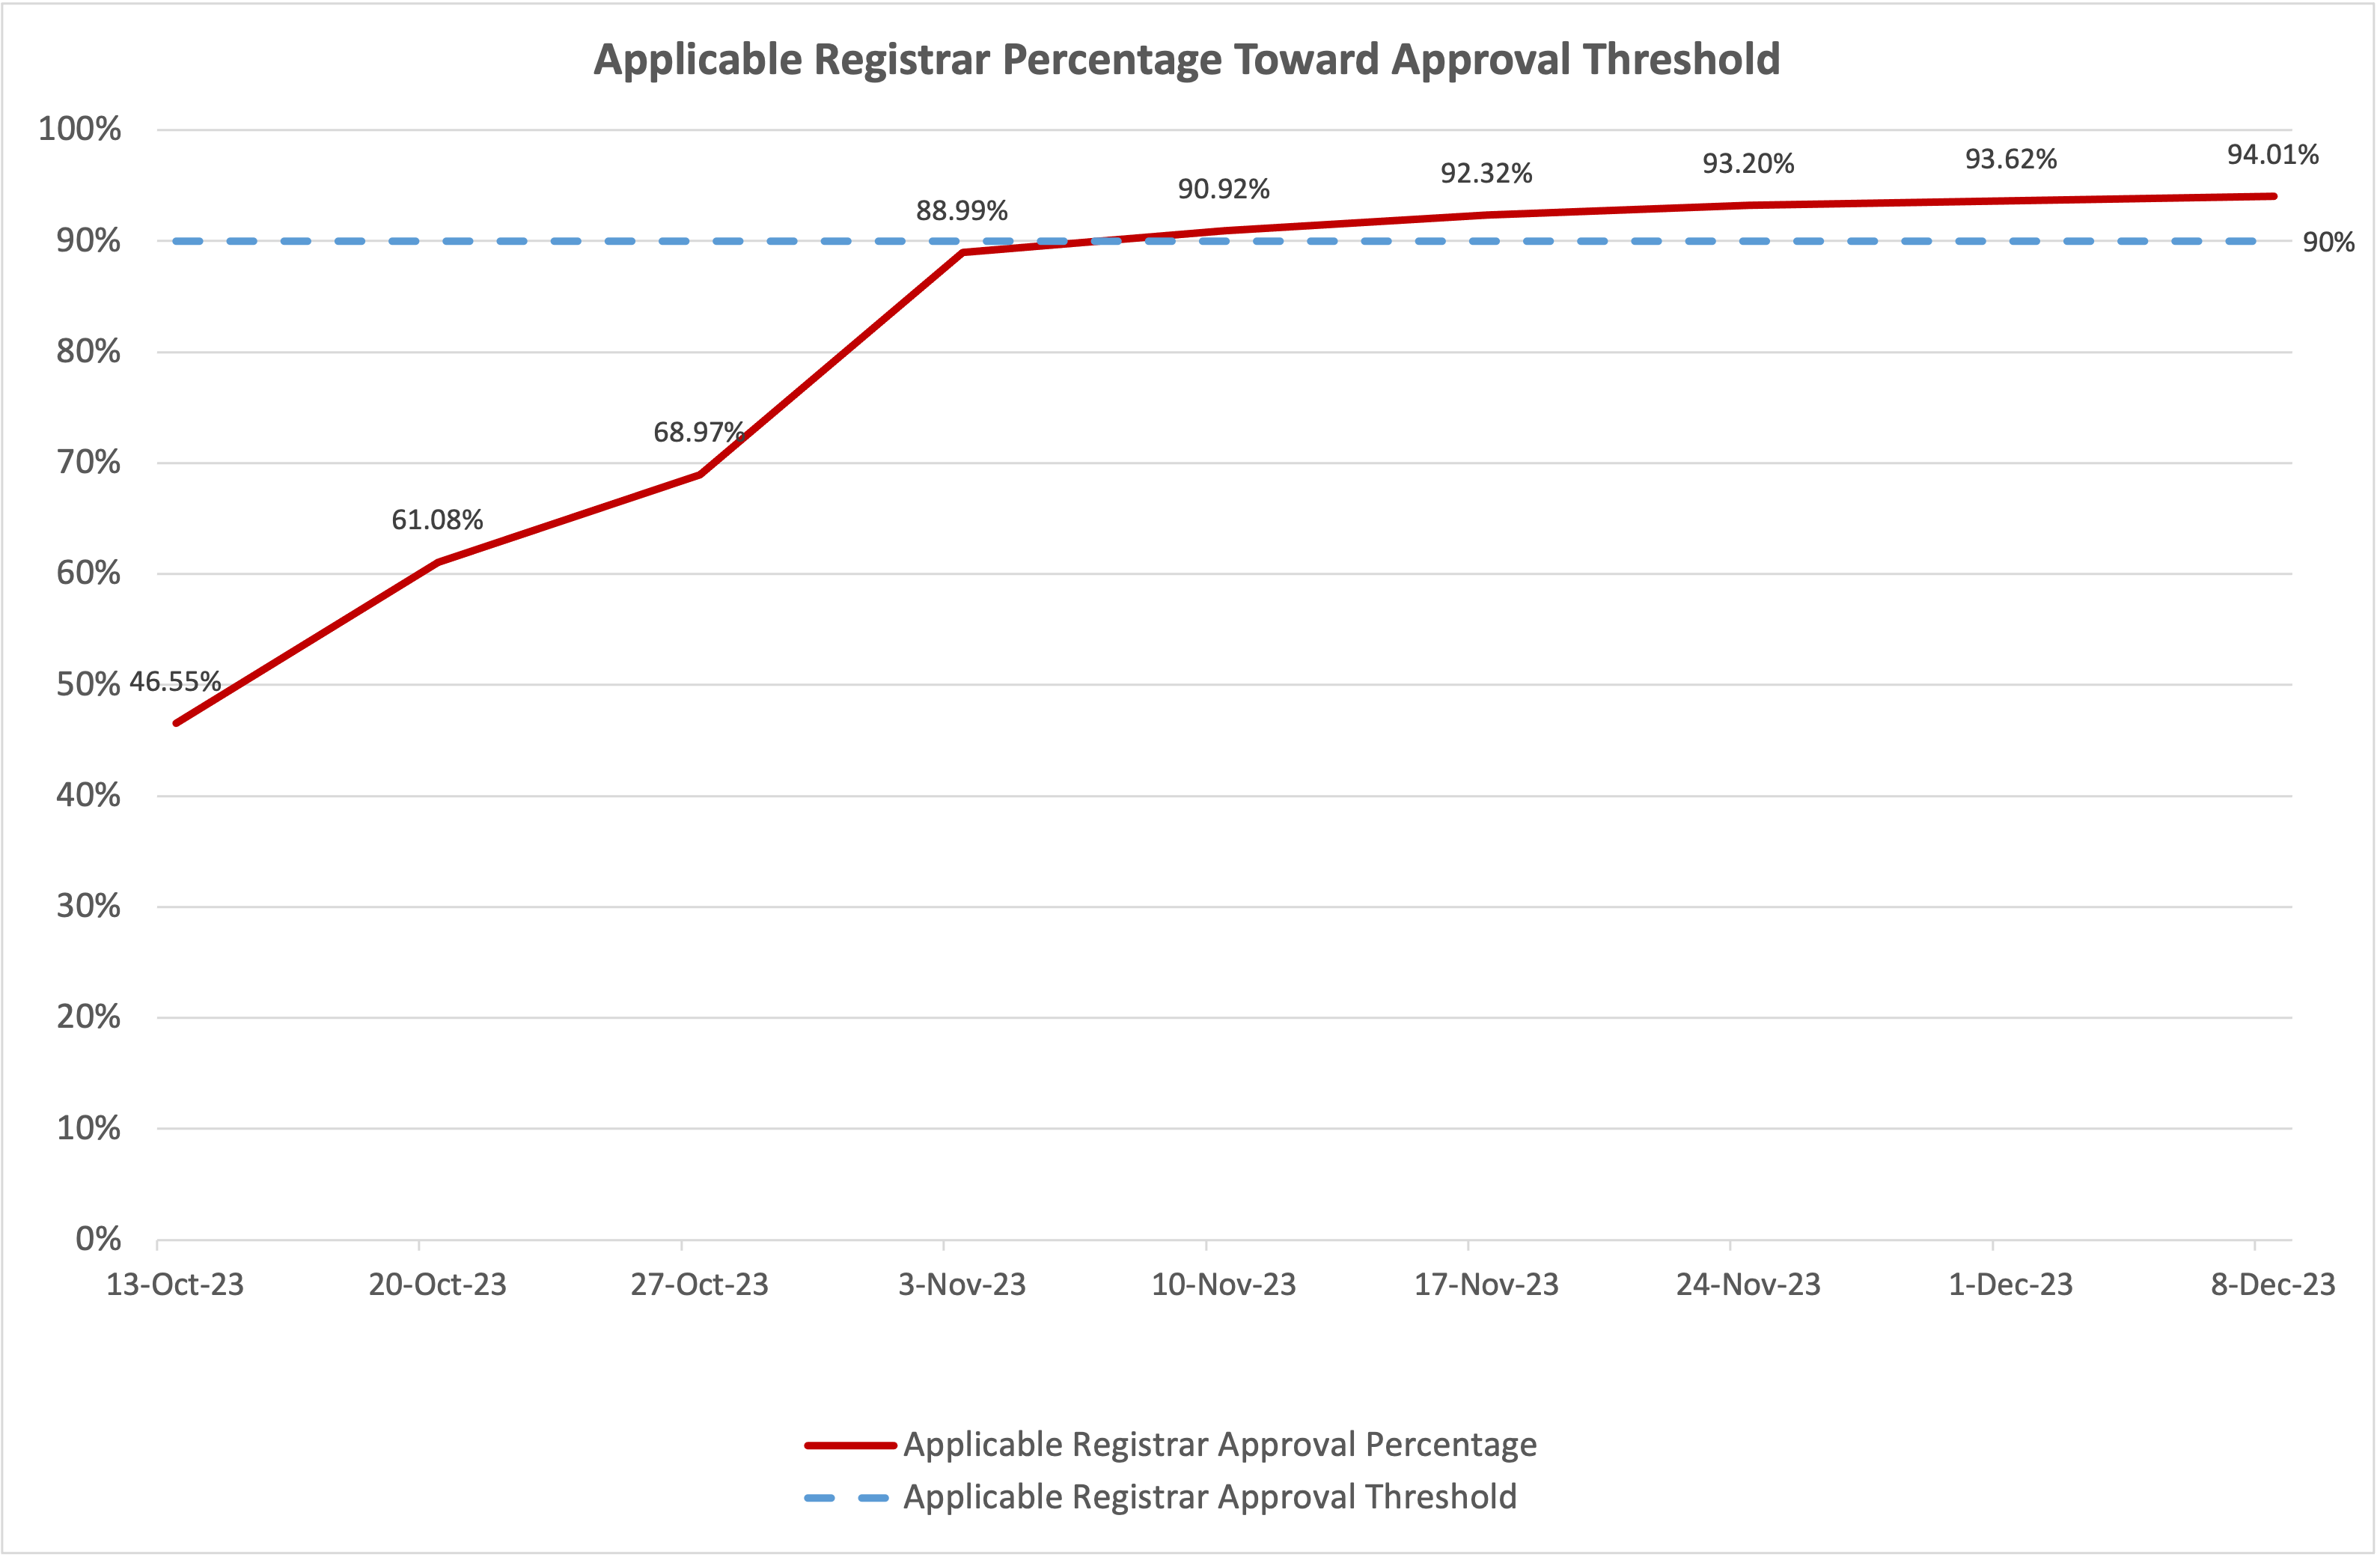 Line chart of the progress of the vote over time towards the affirmative approval of the percentage of total domain names under management (TDUMs) threshold for Applicable Registrars. The TDUMs approval threshold is 90%. As of the 8th of December 2023, the affirmative votes towards the threshold is 94.01%